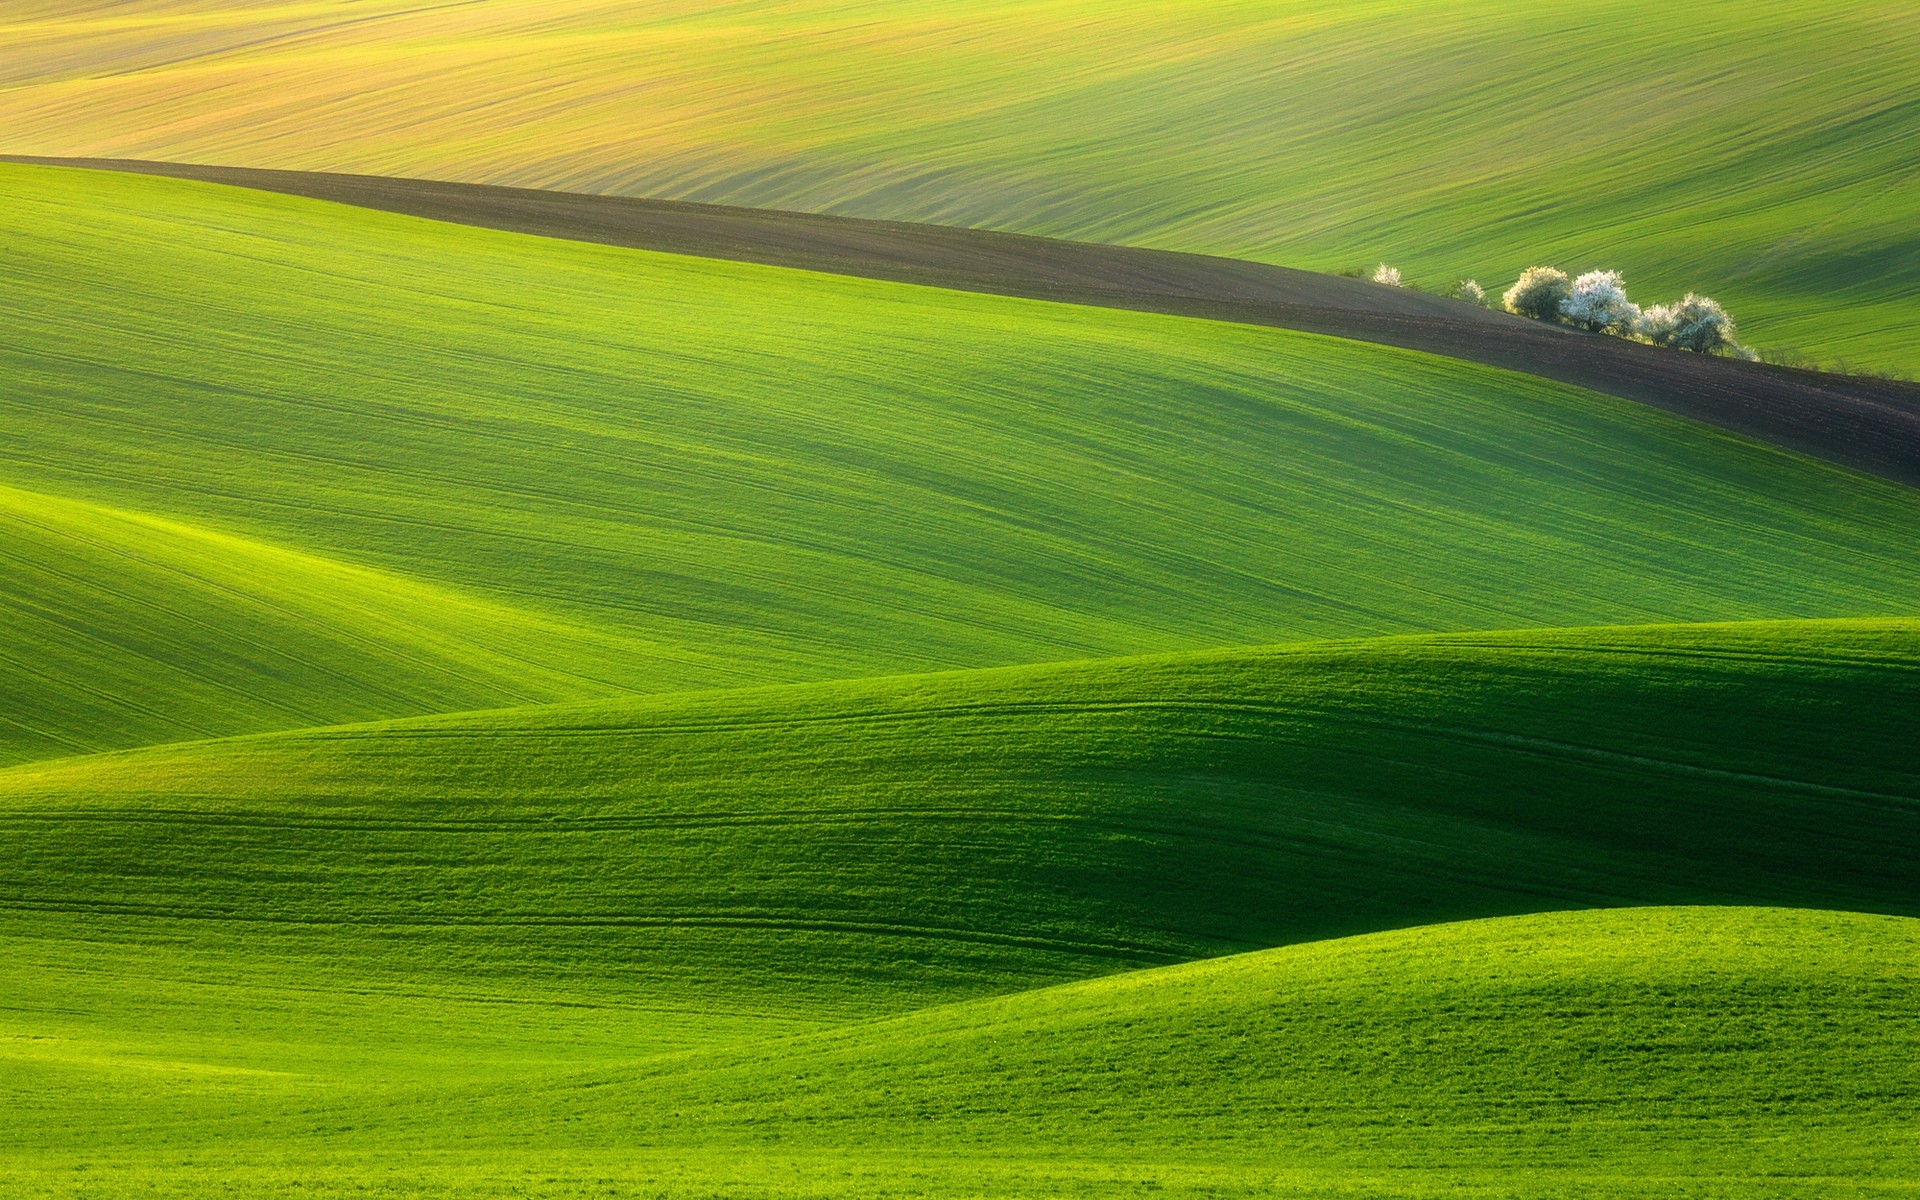 landscapes rural countryside grass nature landscape pasture summer field agriculture farmland fair weather farm dawn sun outdoors bright soil hayfield background green hills